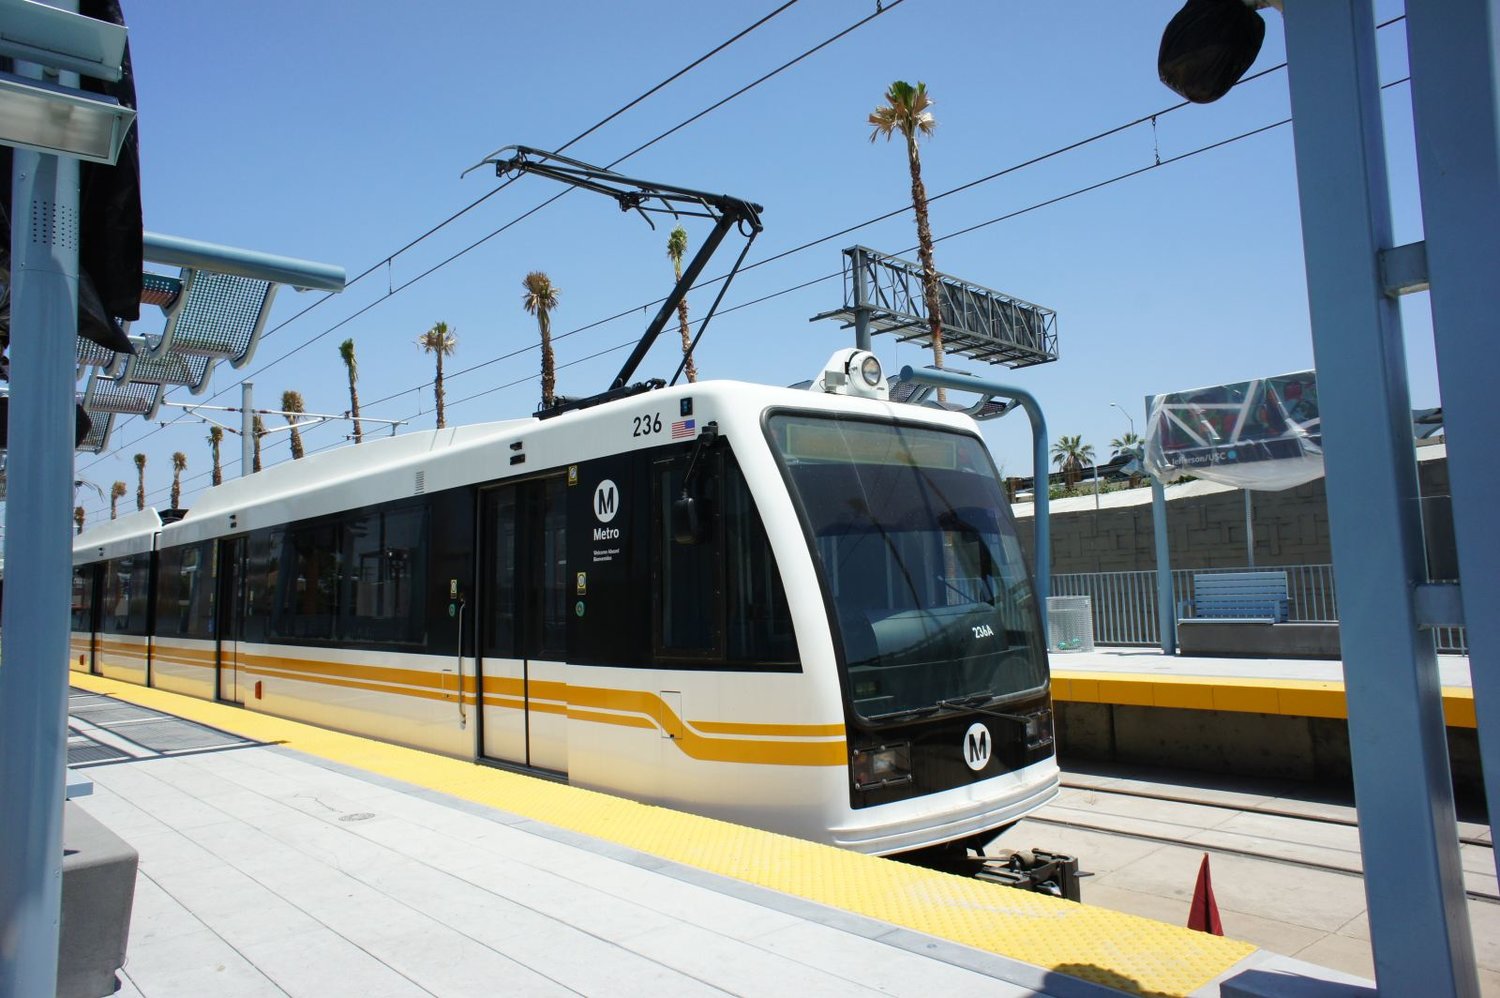 13-facts-about-transportation-and-infrastructure-in-montclair-california